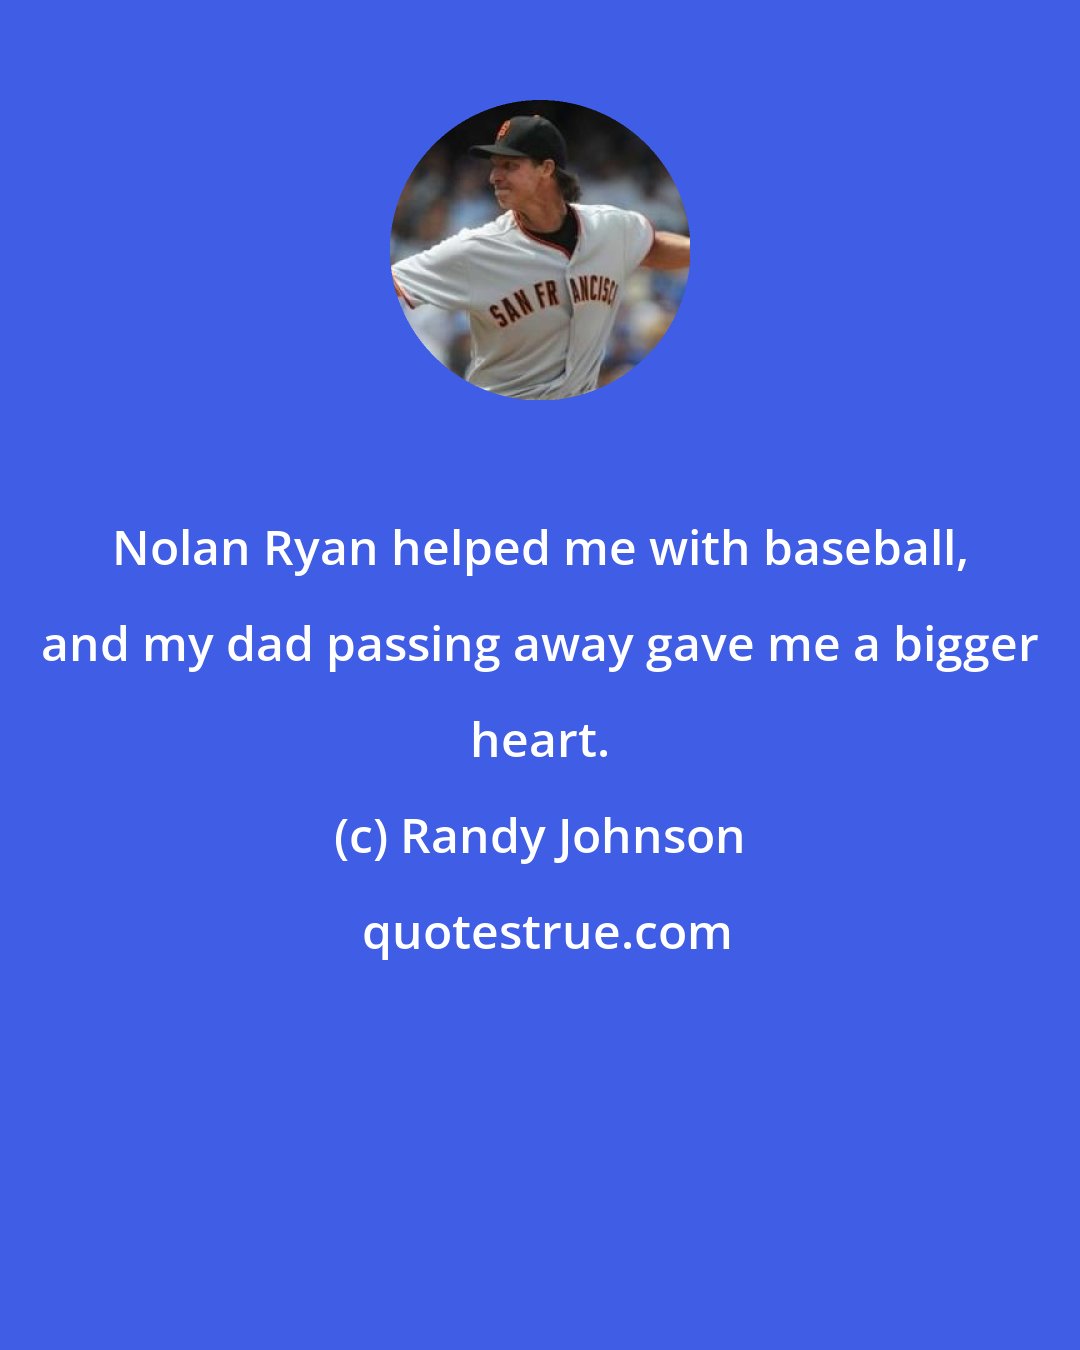 Randy Johnson: Nolan Ryan helped me with baseball, and my dad passing away gave me a bigger heart.